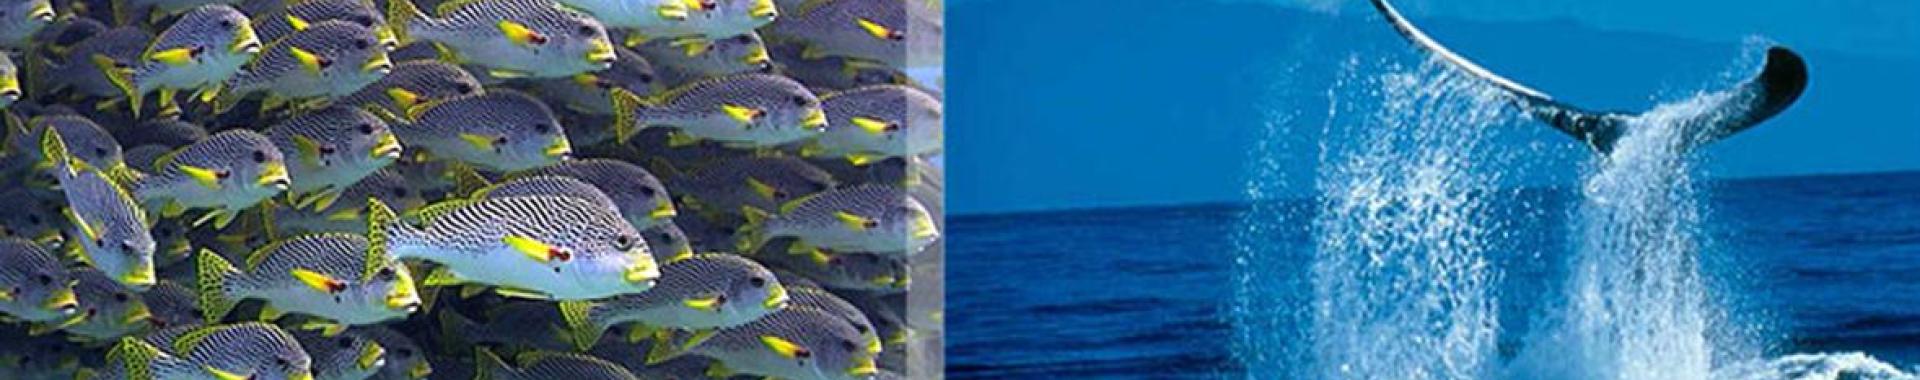 Split image: school of fish and a whale's tail.